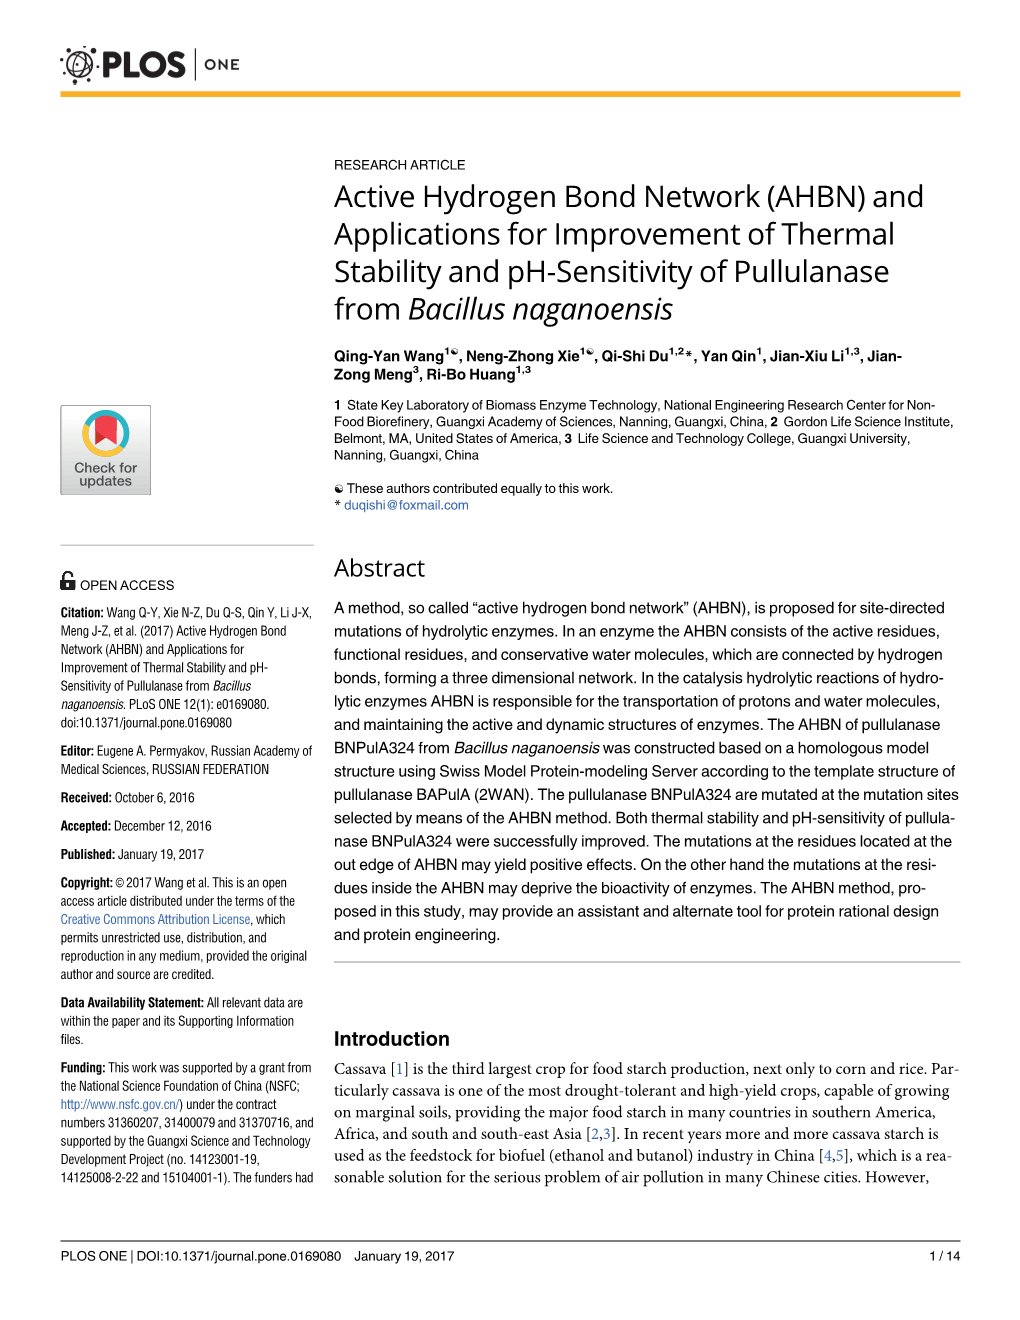 Active Hydrogen Bond Network (AHBN) and Applications for Improvement of Thermal Stability and Ph-Sensitivity of Pullulanase from Bacillus Naganoensis